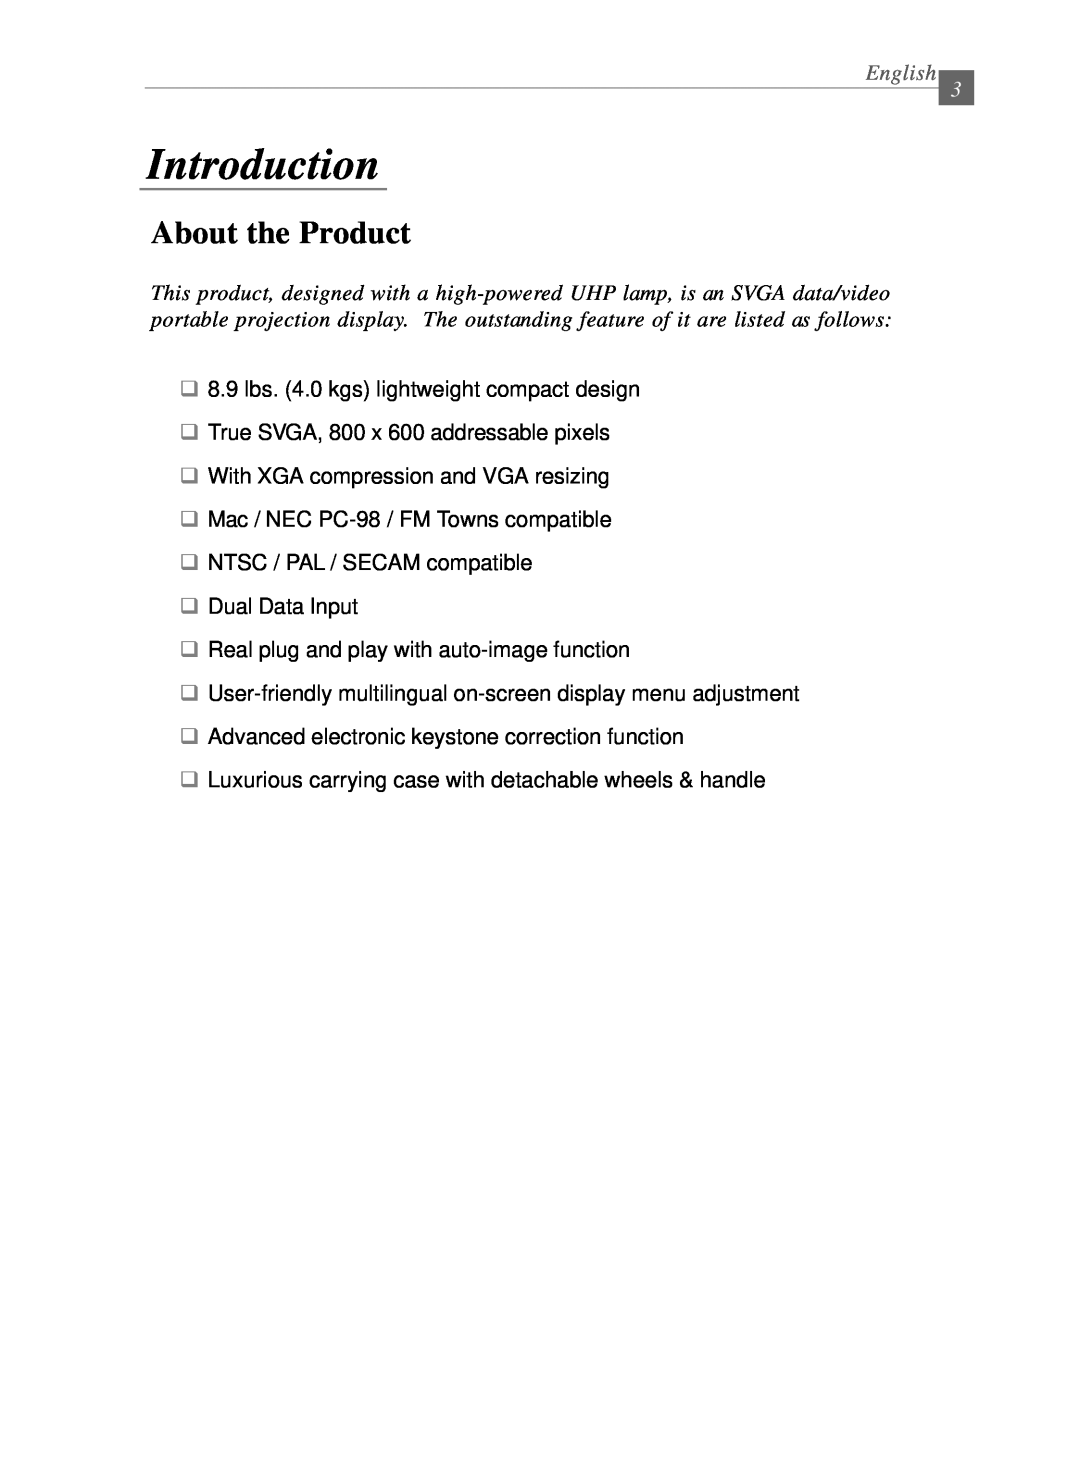 Dukane 28A8040 manual Introduction, About the Product, English 